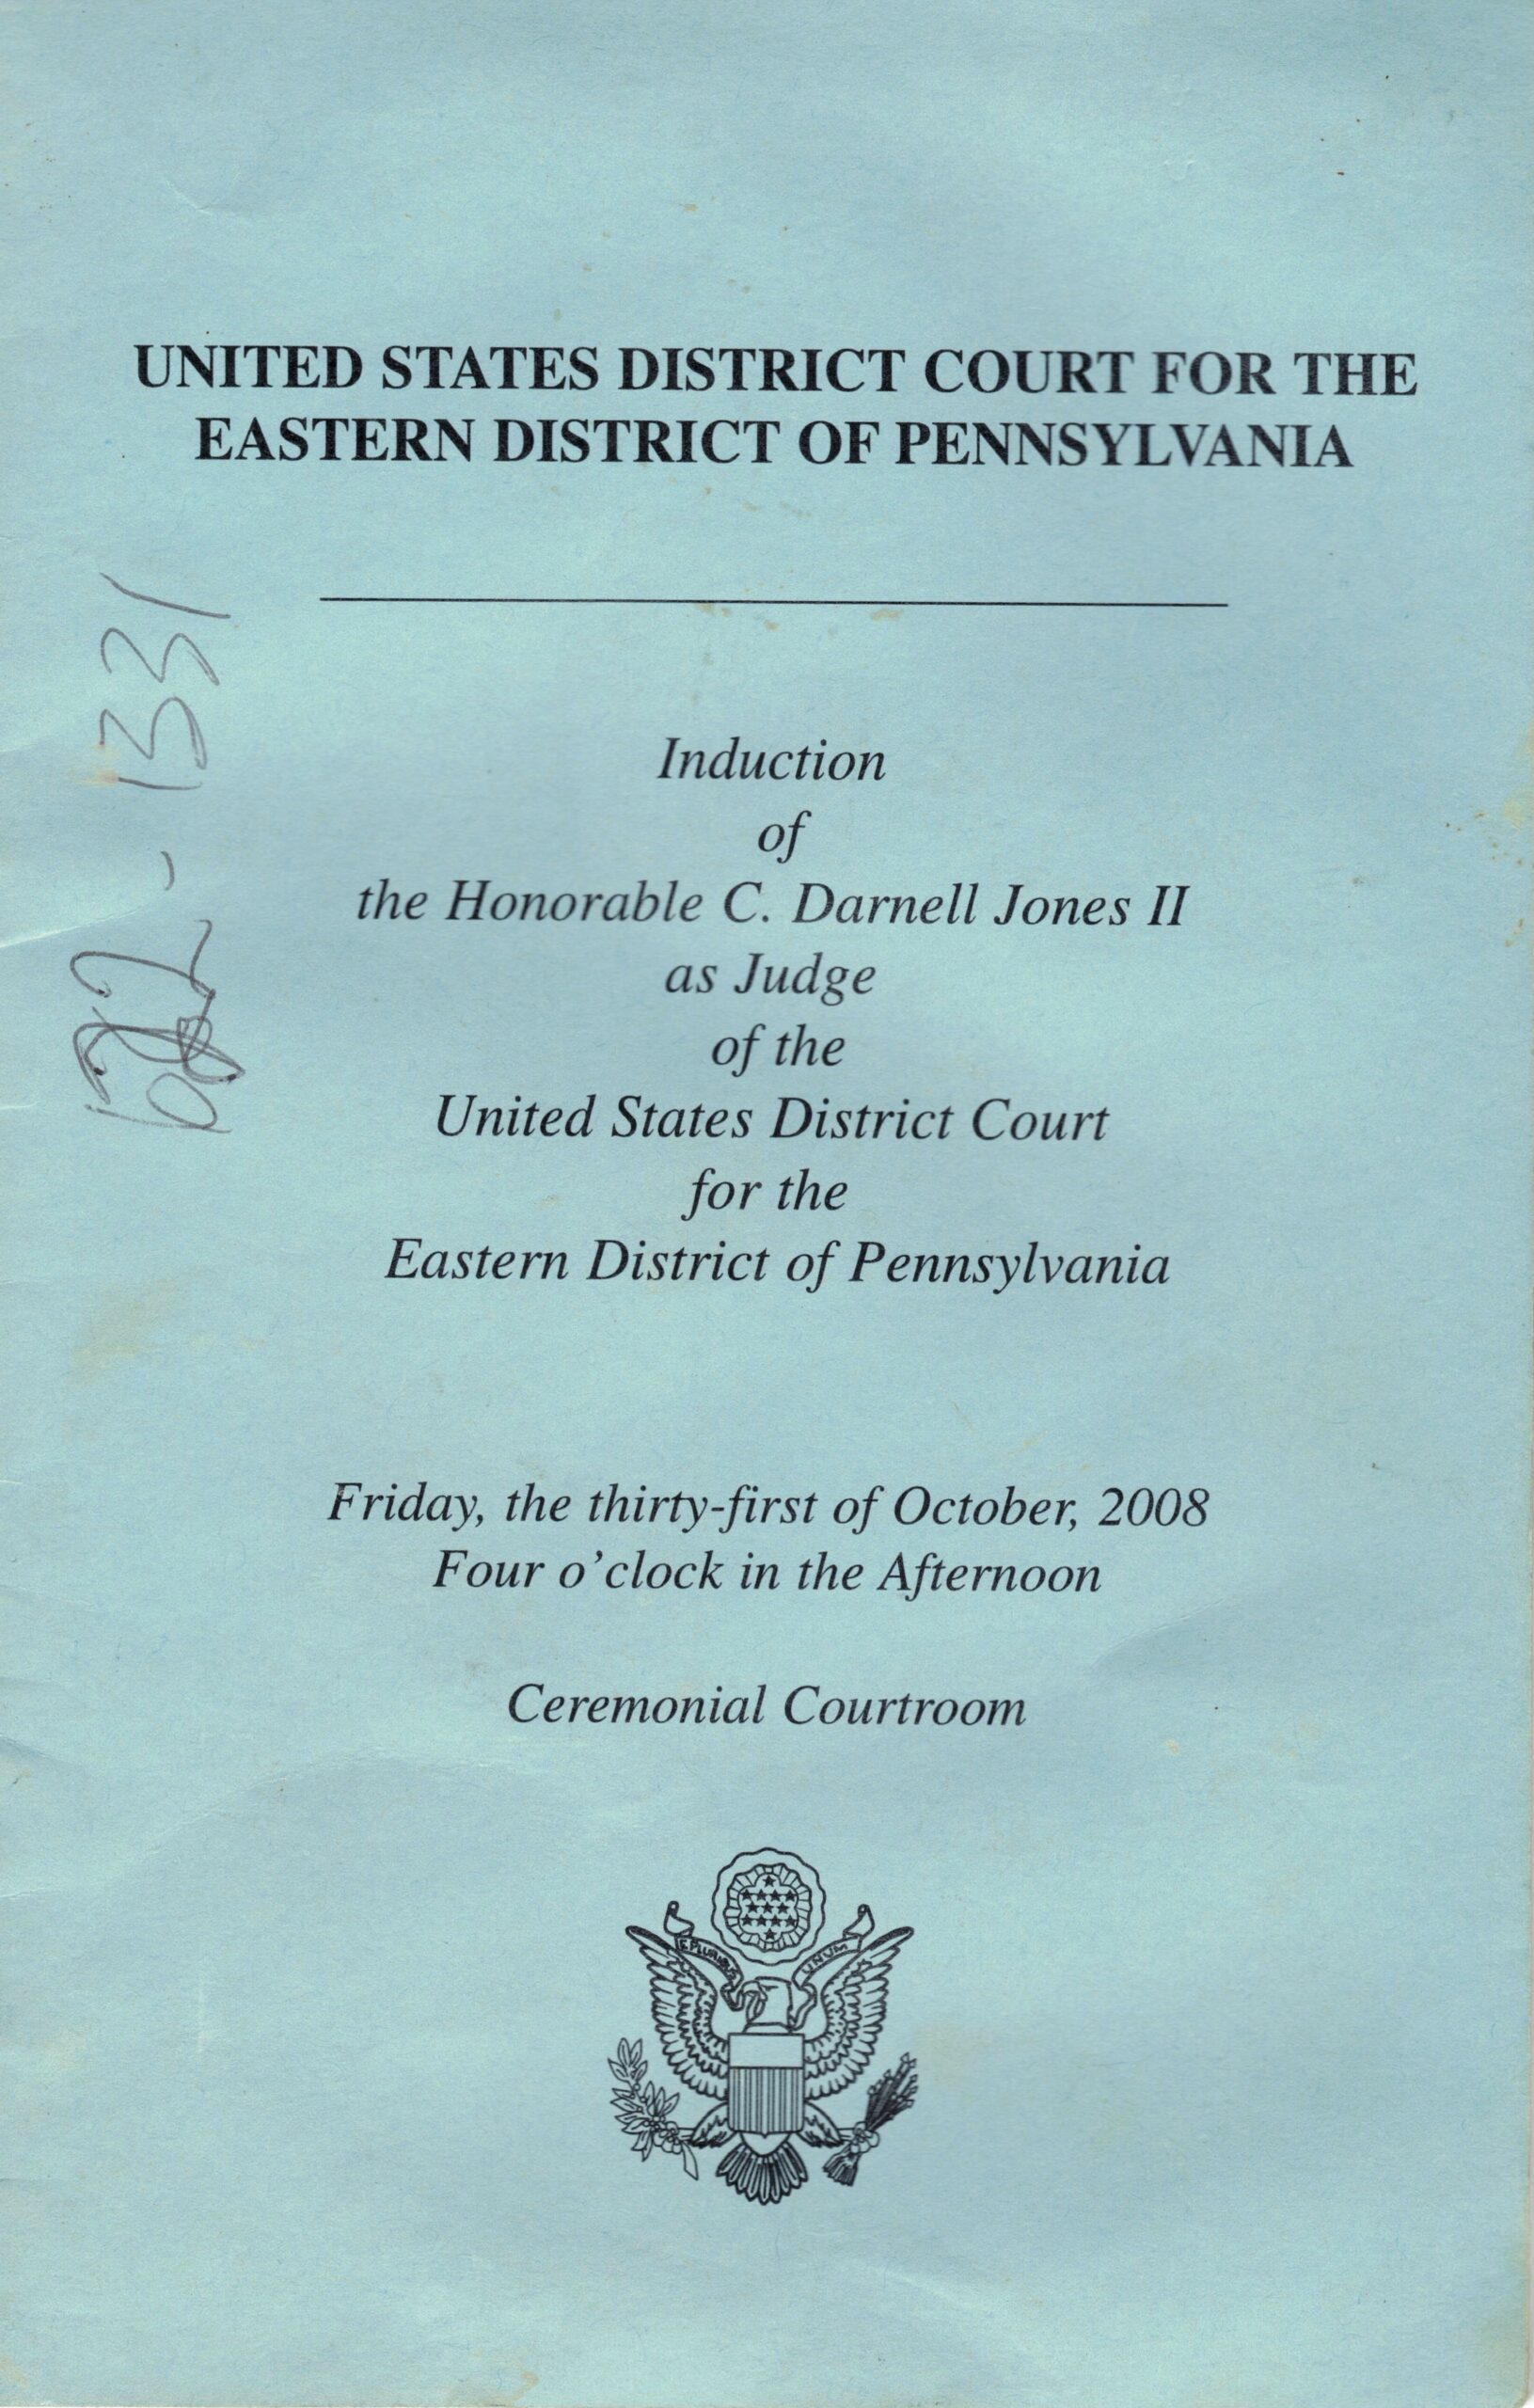 Front cover of the program pamphlet for the induction of Judge Darnell Jones to the Eastern District Court of Pennsylvania.